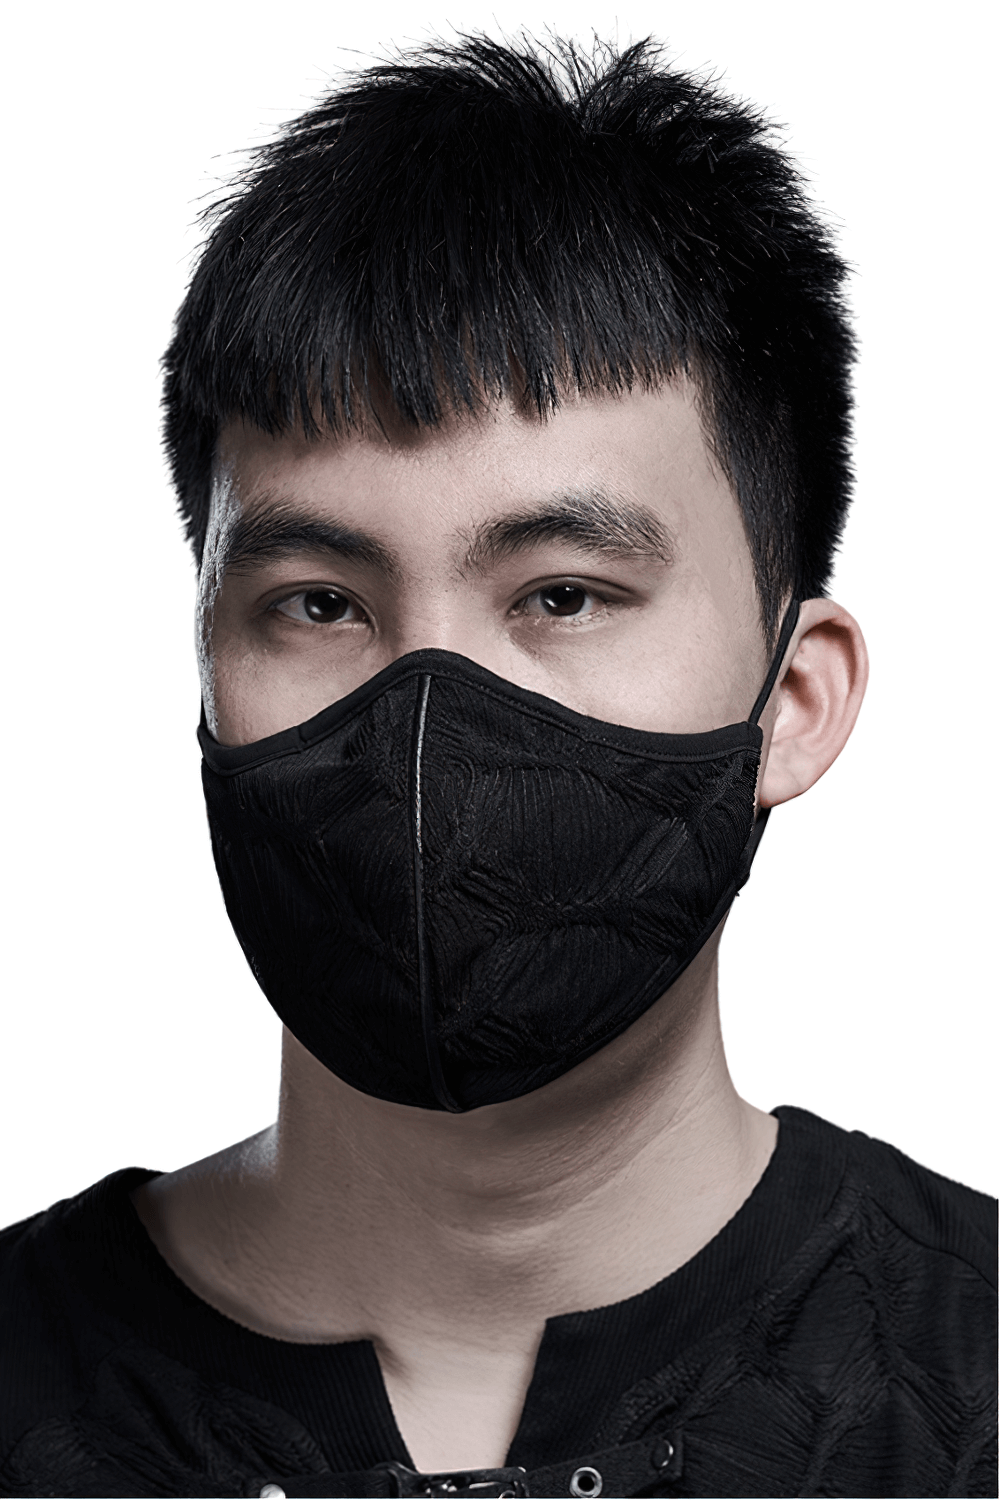 Black Knit Face Mask - Adjustable And Breathable